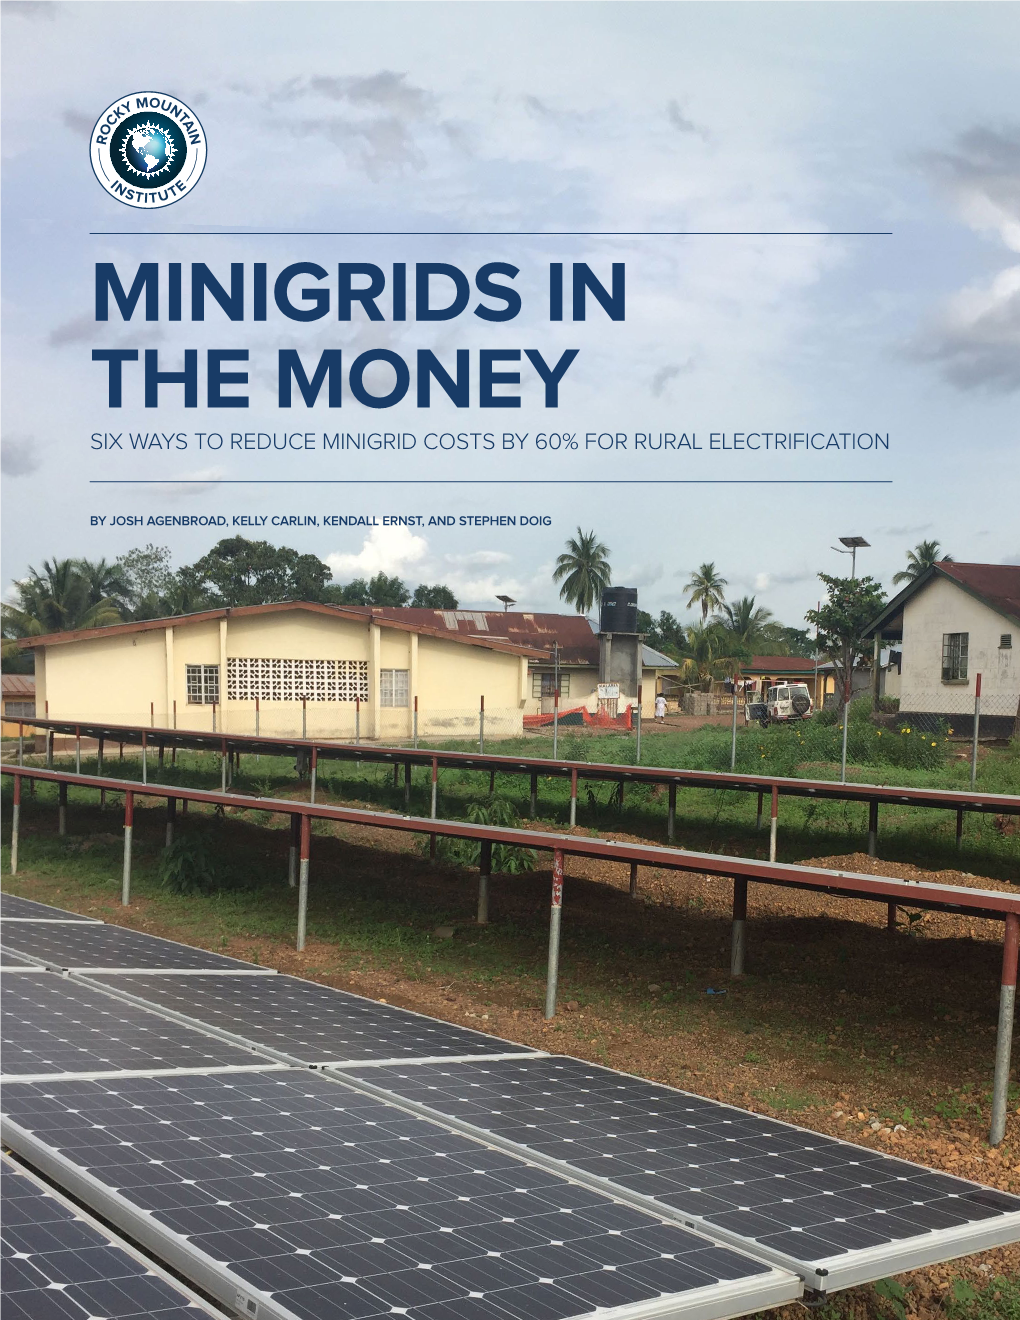 Minigrids in the Money Six Ways to Reduce Minigrid Costs by 60% for Rural Electrification